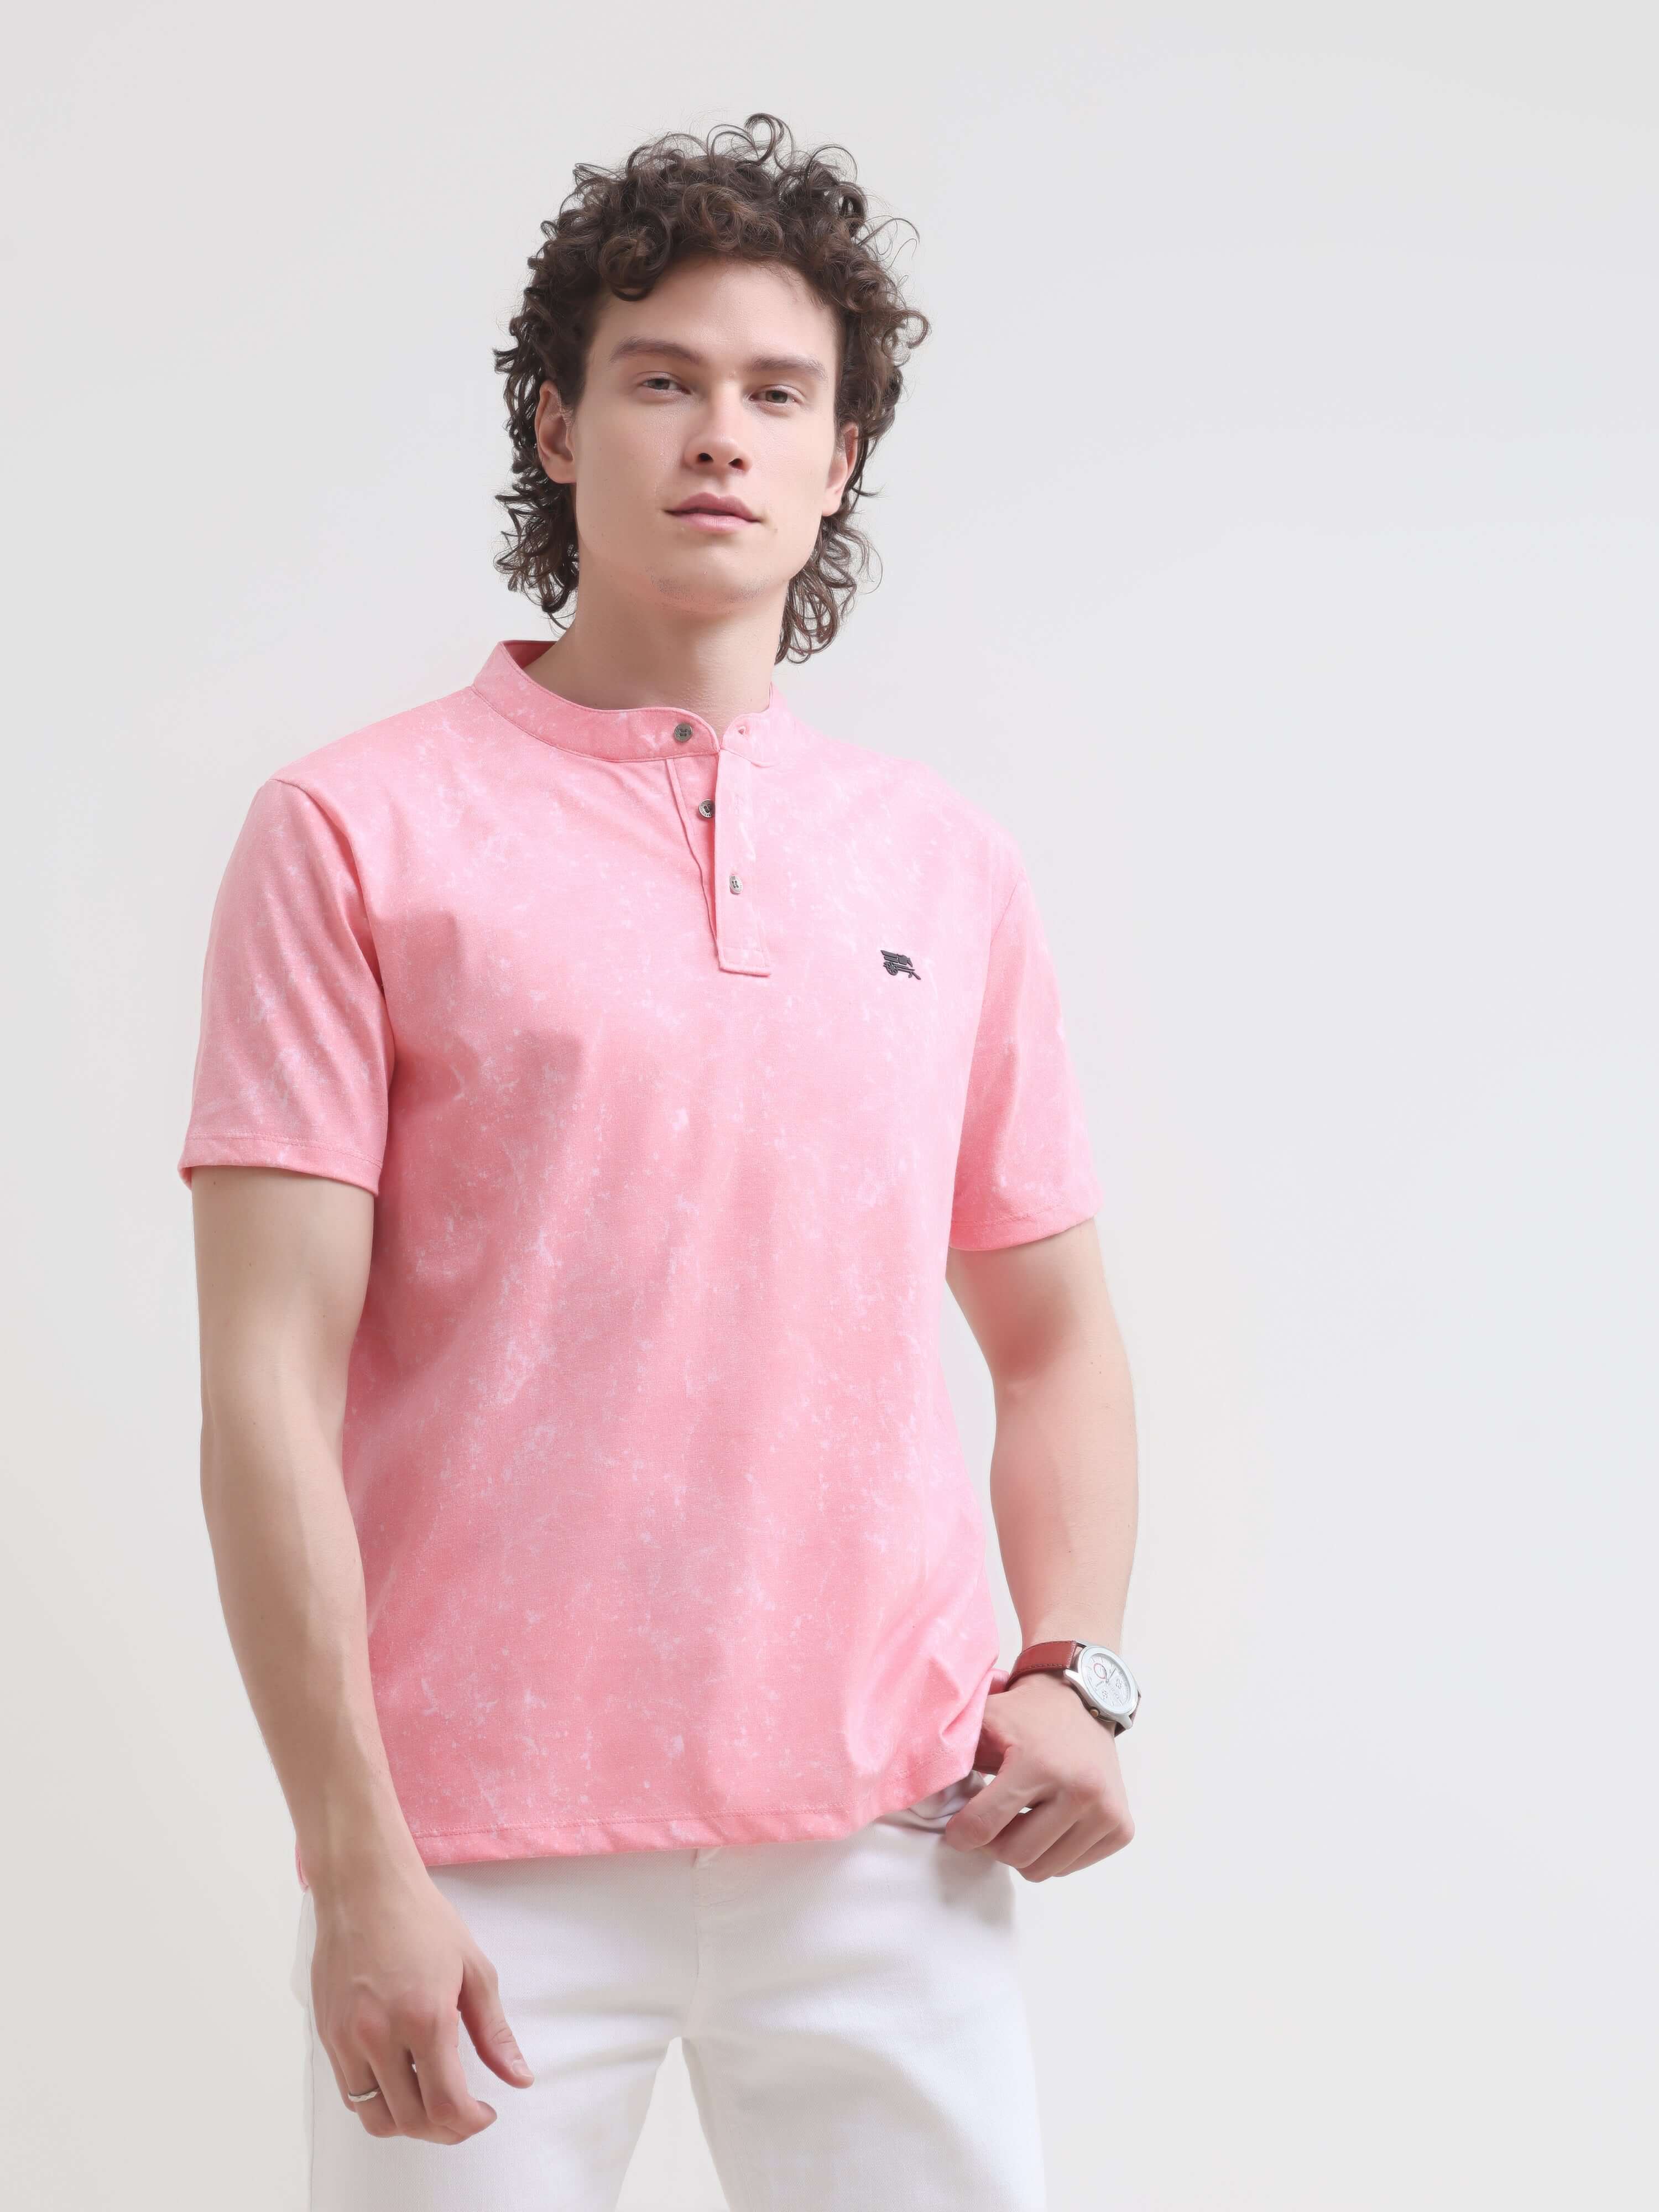 Men's Pink Henley T-Shirt - Lim's Latest Summer Casual shop online at Estilocus. Shop the new Lim solid pink Henley tee - light & stretchy 100% cotton fabric for all-day comfort. Perfect for summer casual wear.